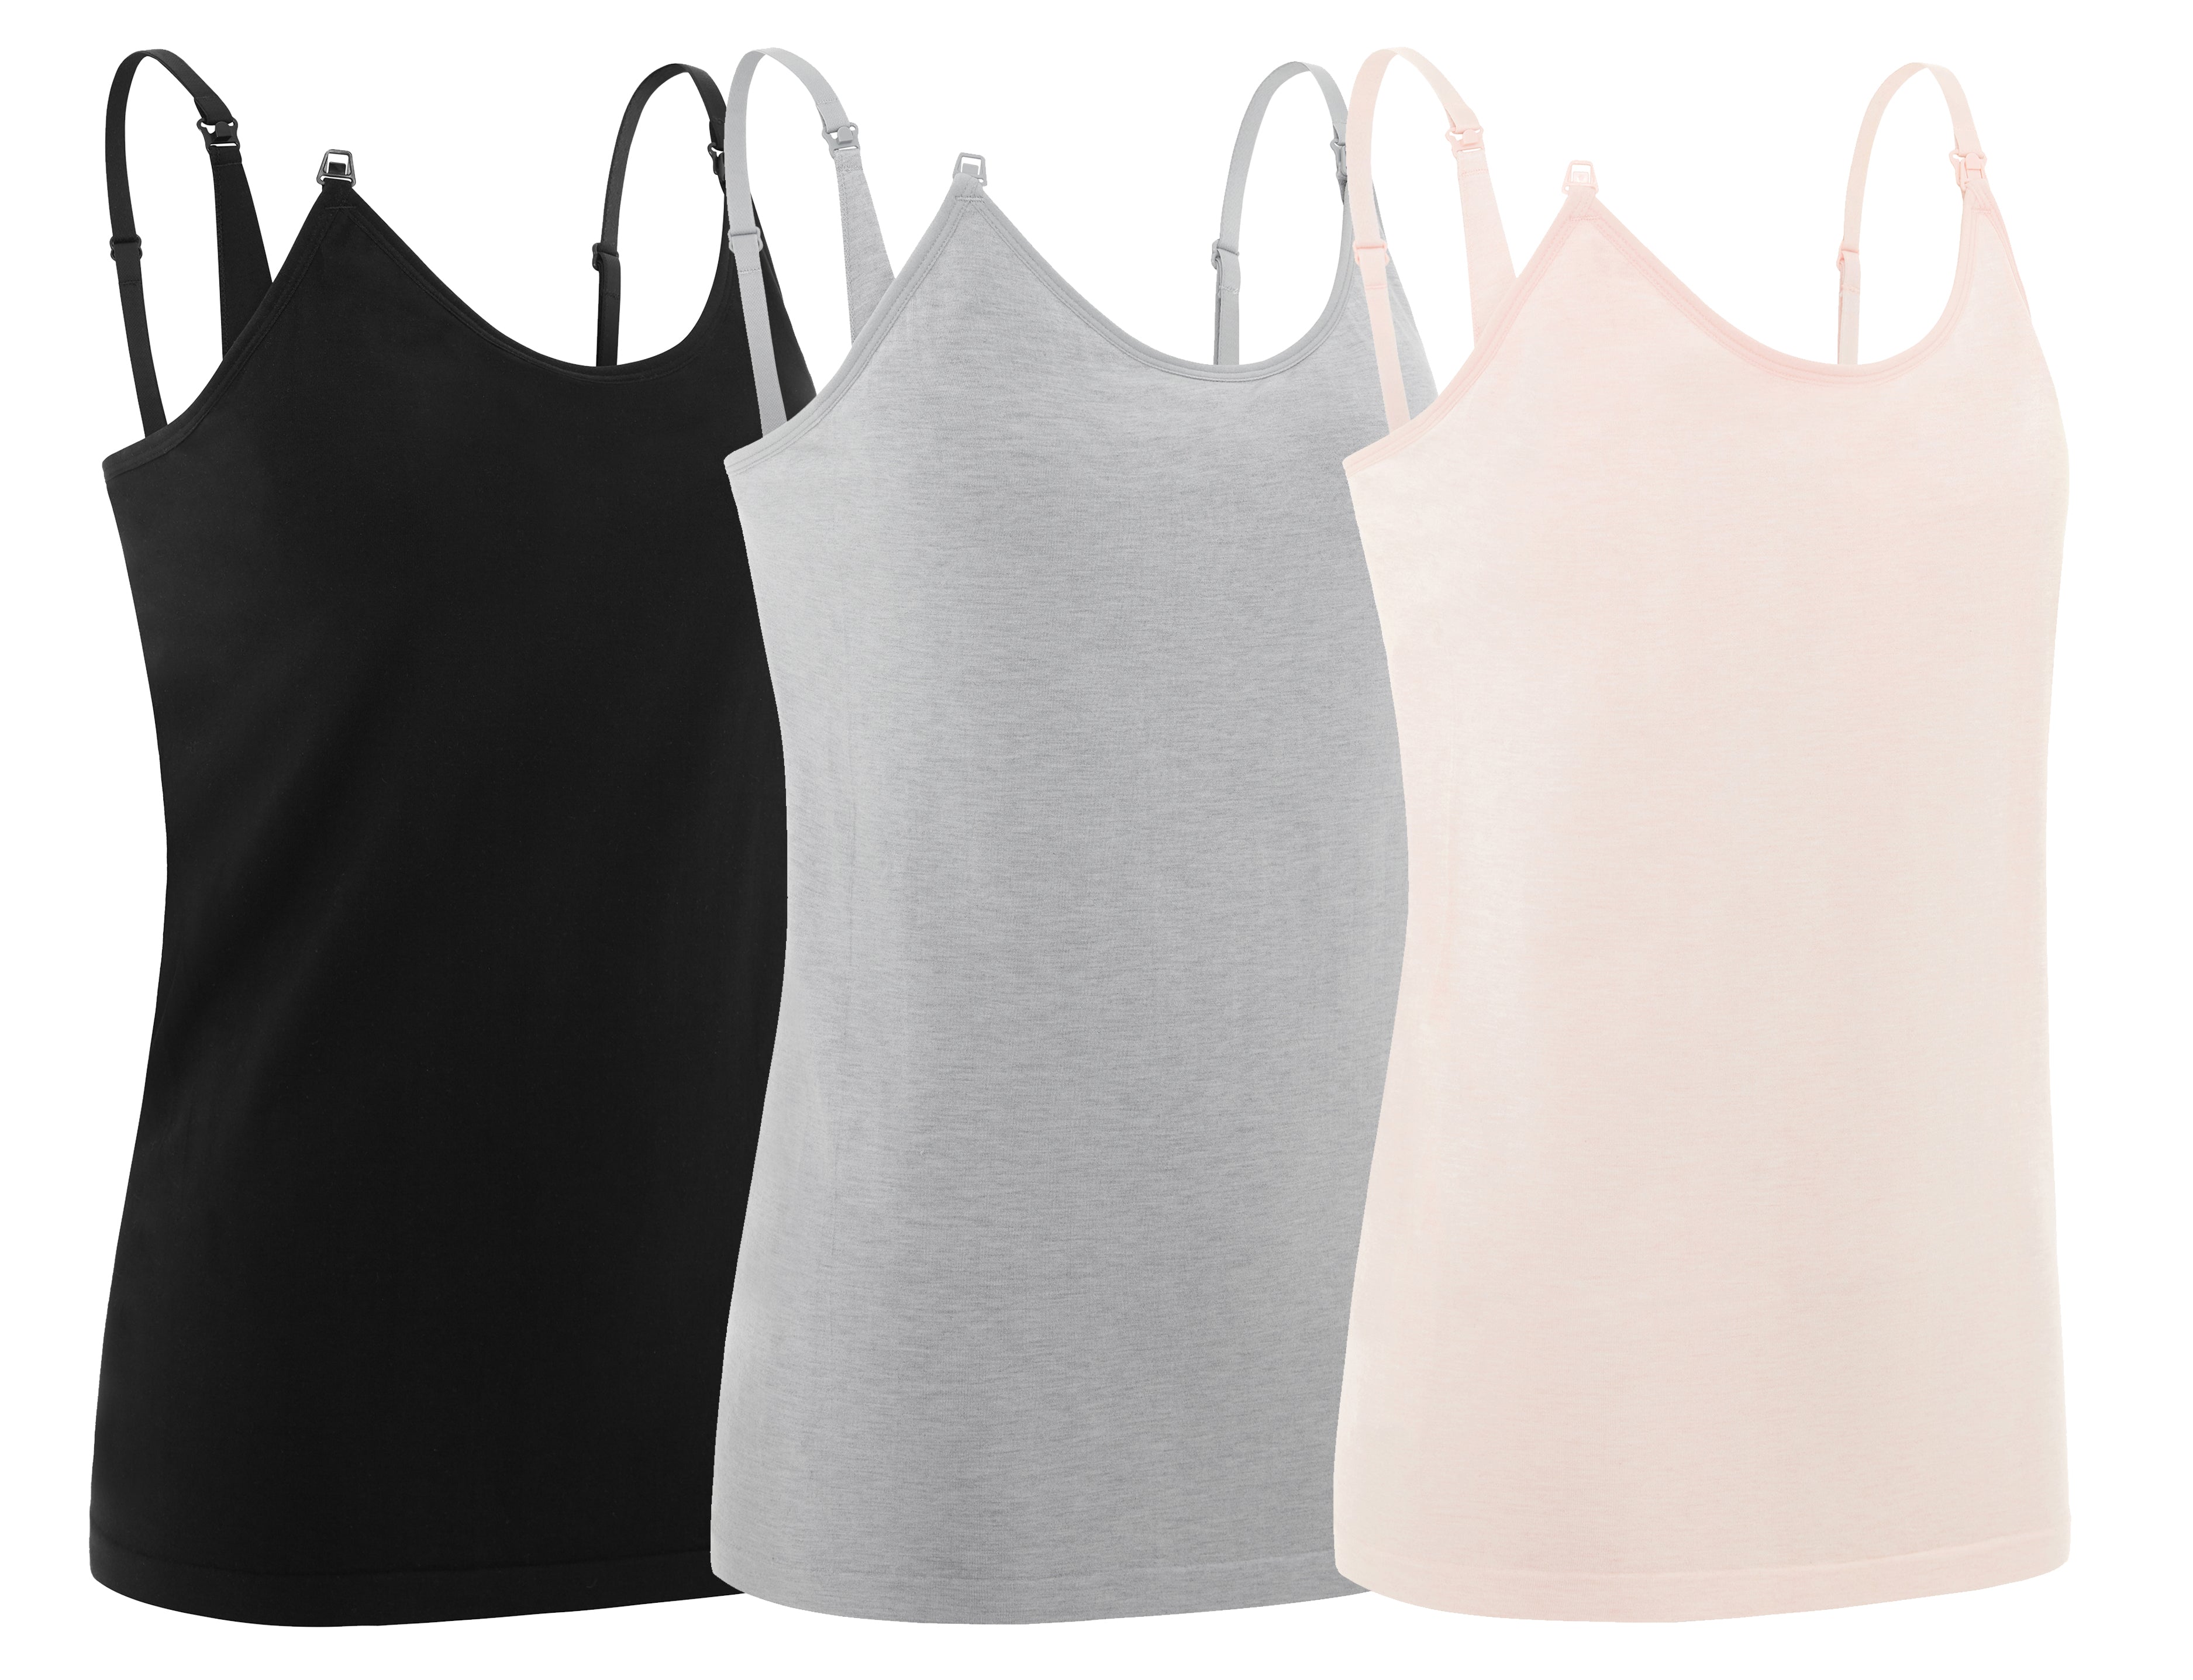 Under Control |Maternity 3 Pack (Black/Grey/Pink) Camisole